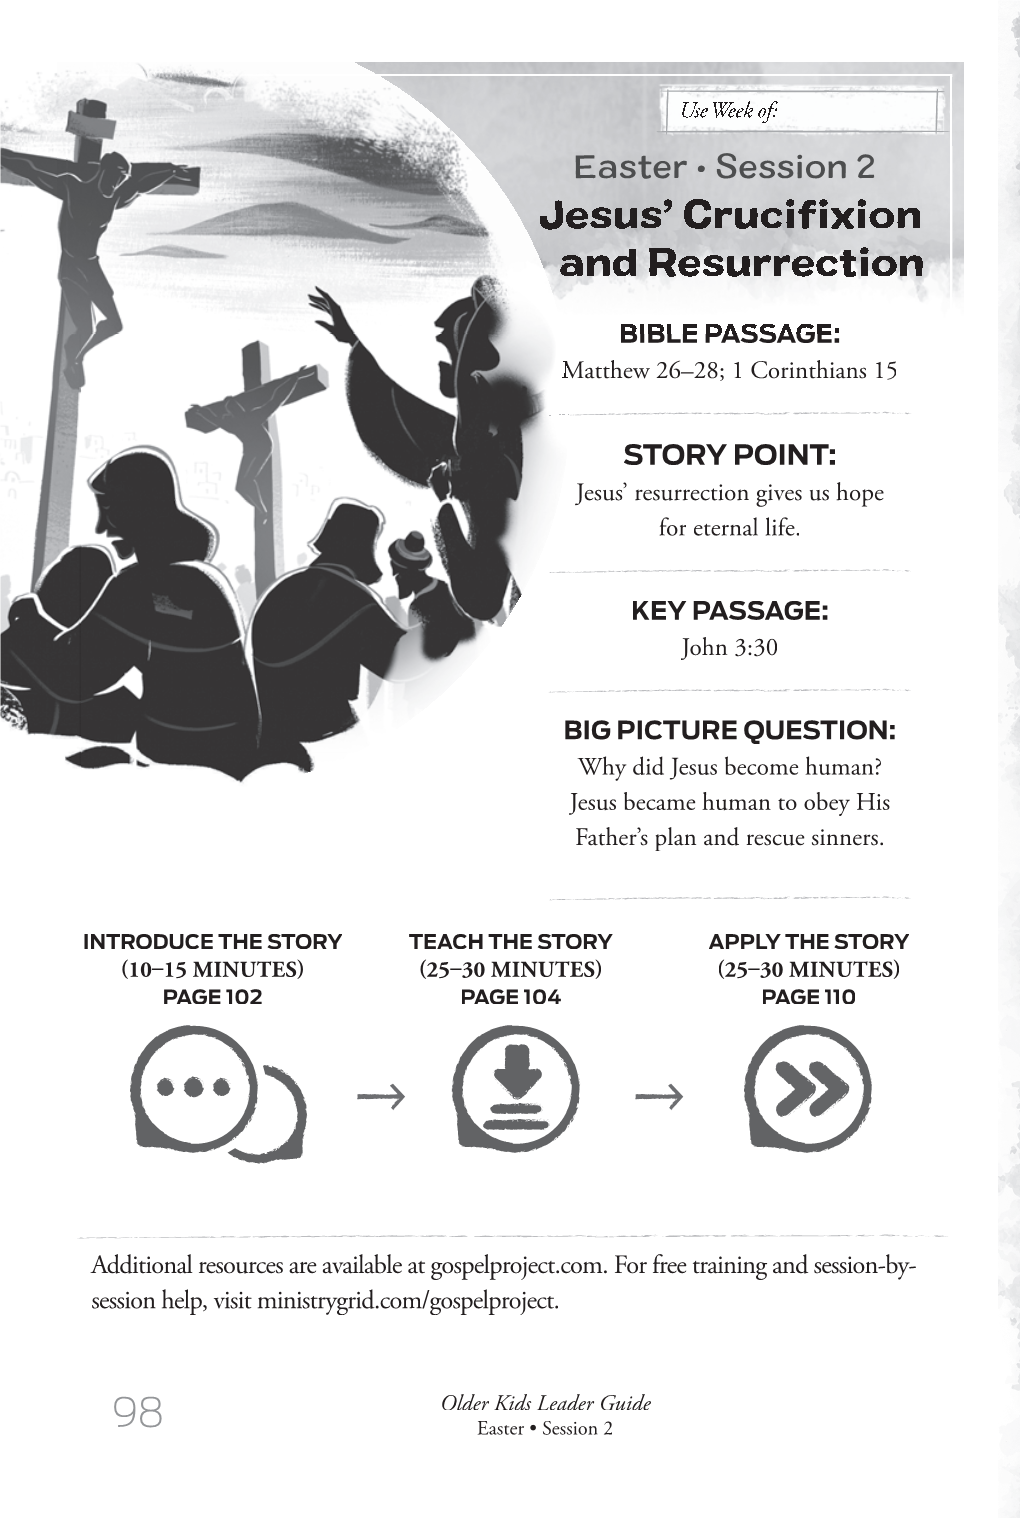 Easter • Session 2 Jesus’ Crucifixion and Resurrection